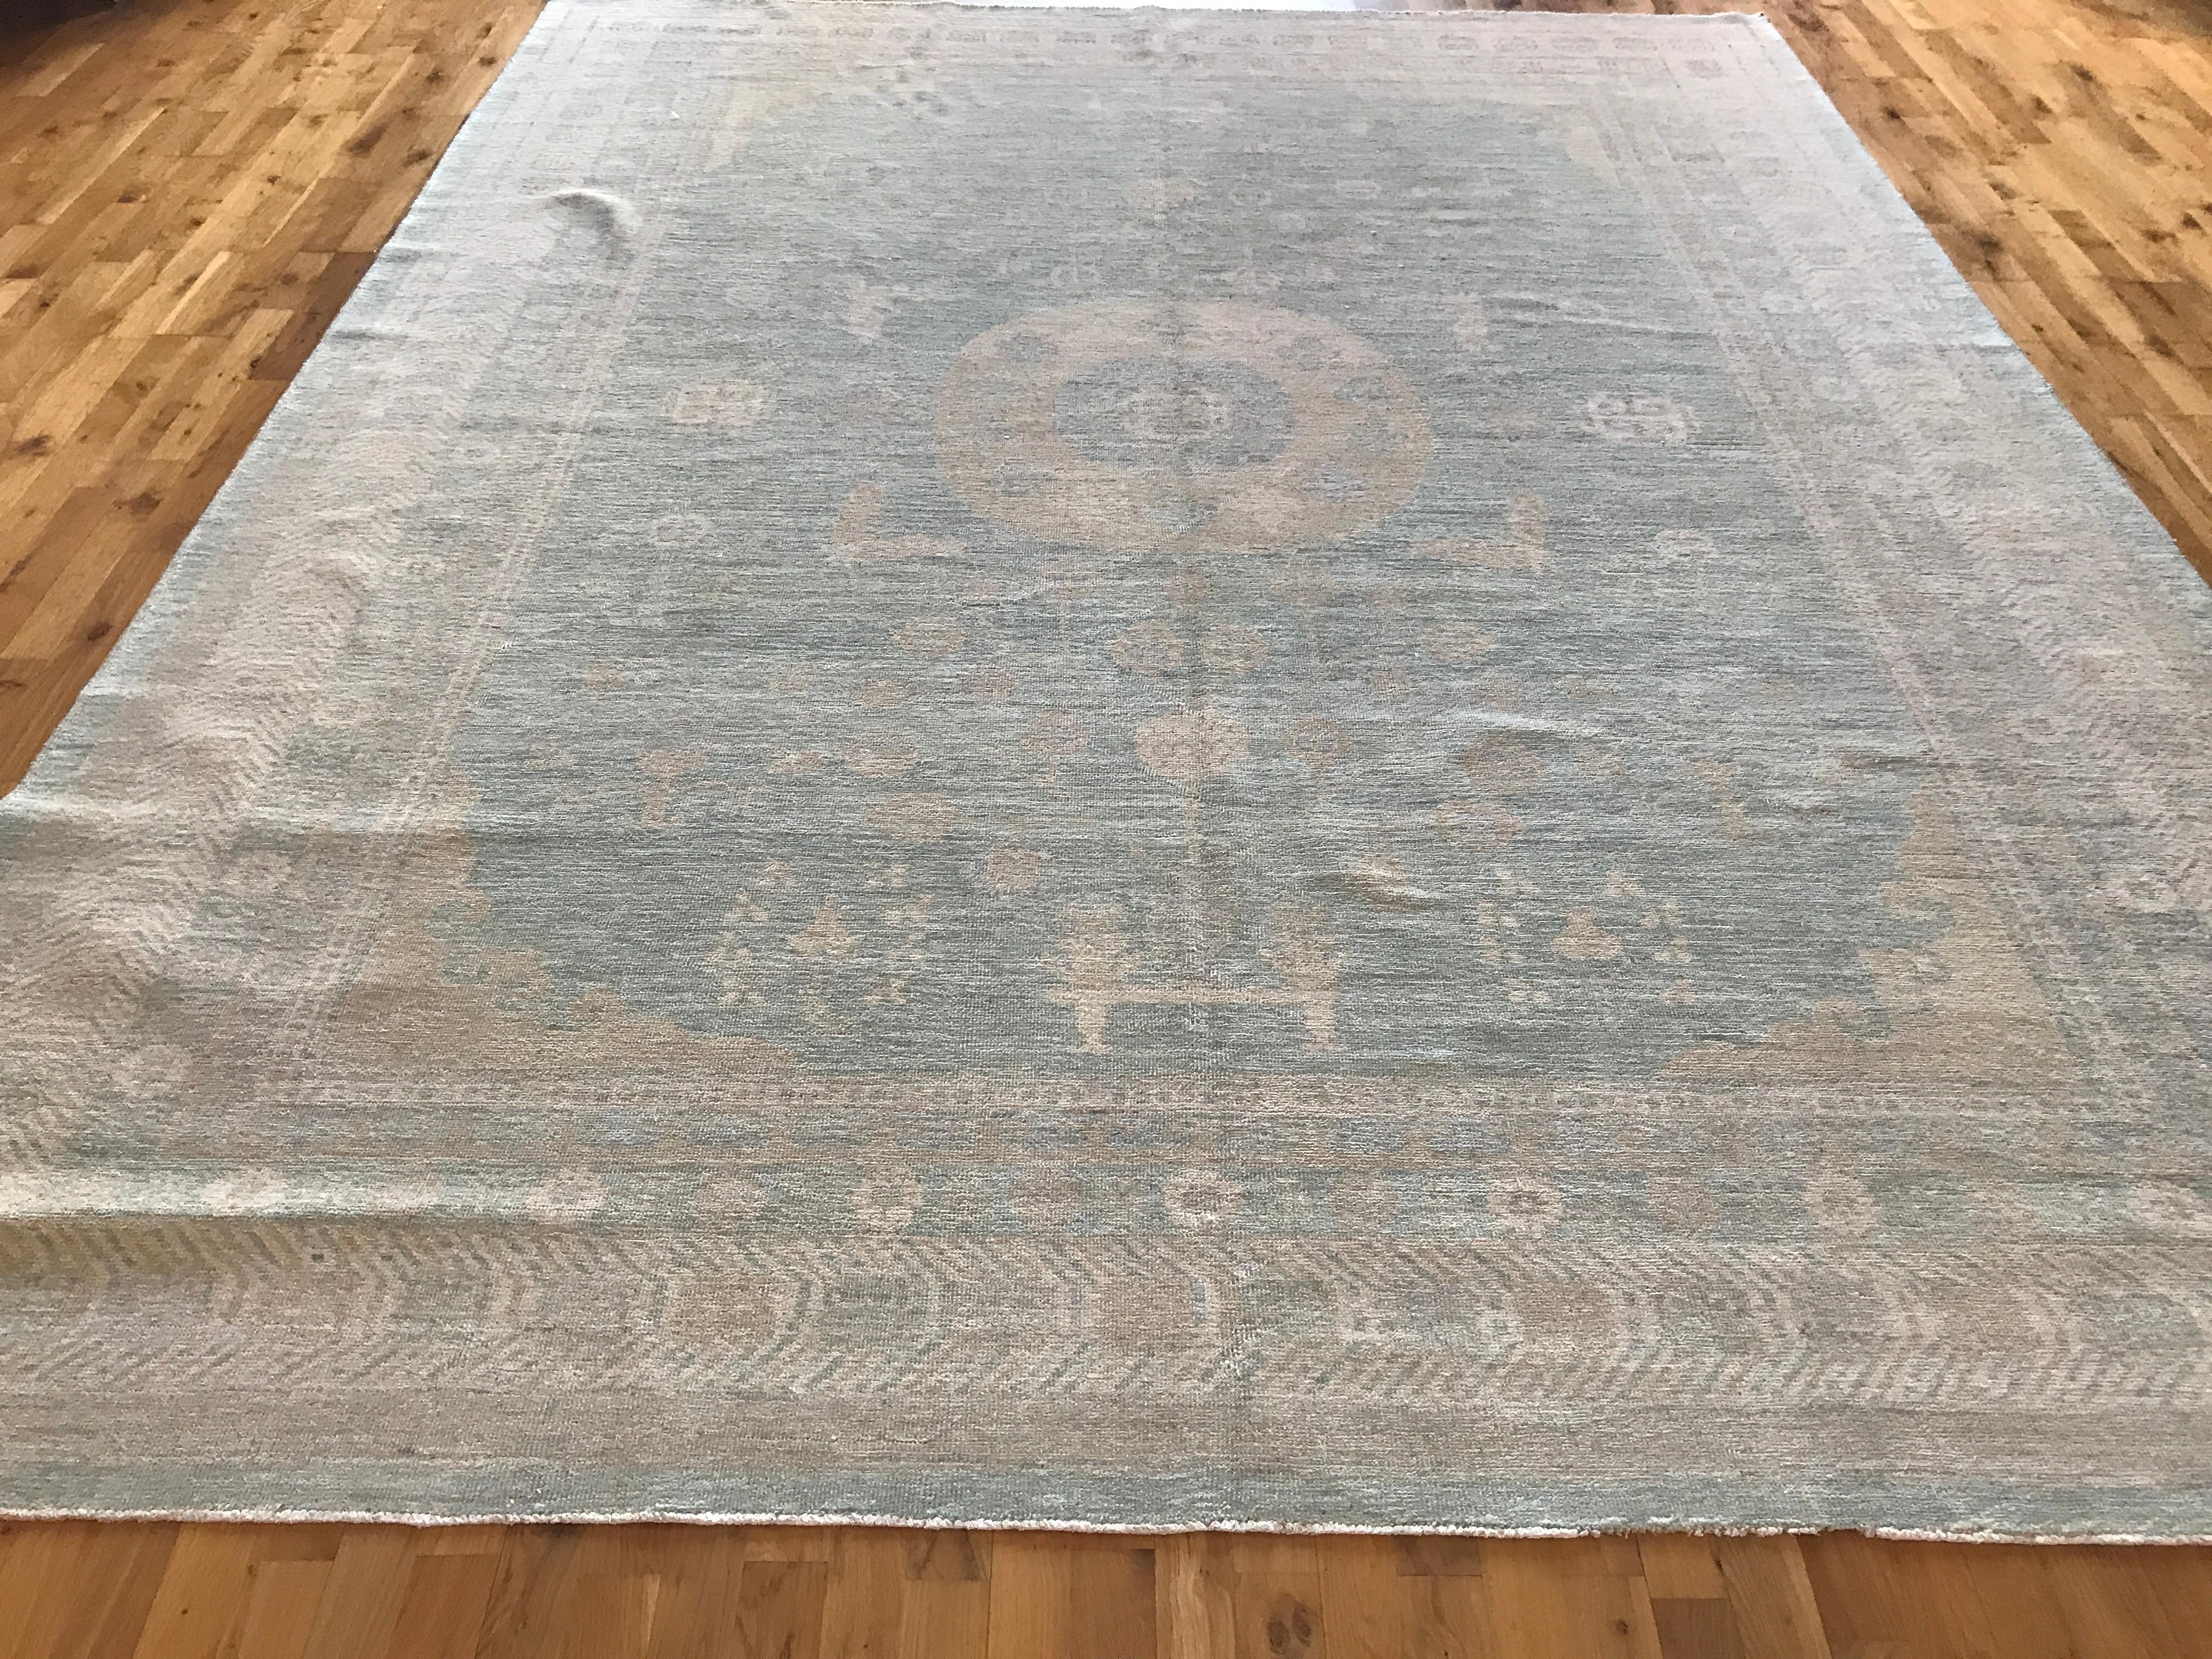 Khotan rugs embody the history and mystery of the Silk Road. This Fine Pakistani Khotan style rug made with vegetal dye is no exception. Today's Khotan's have the added benefit of versatility -- their colors and designs make them equally at home in